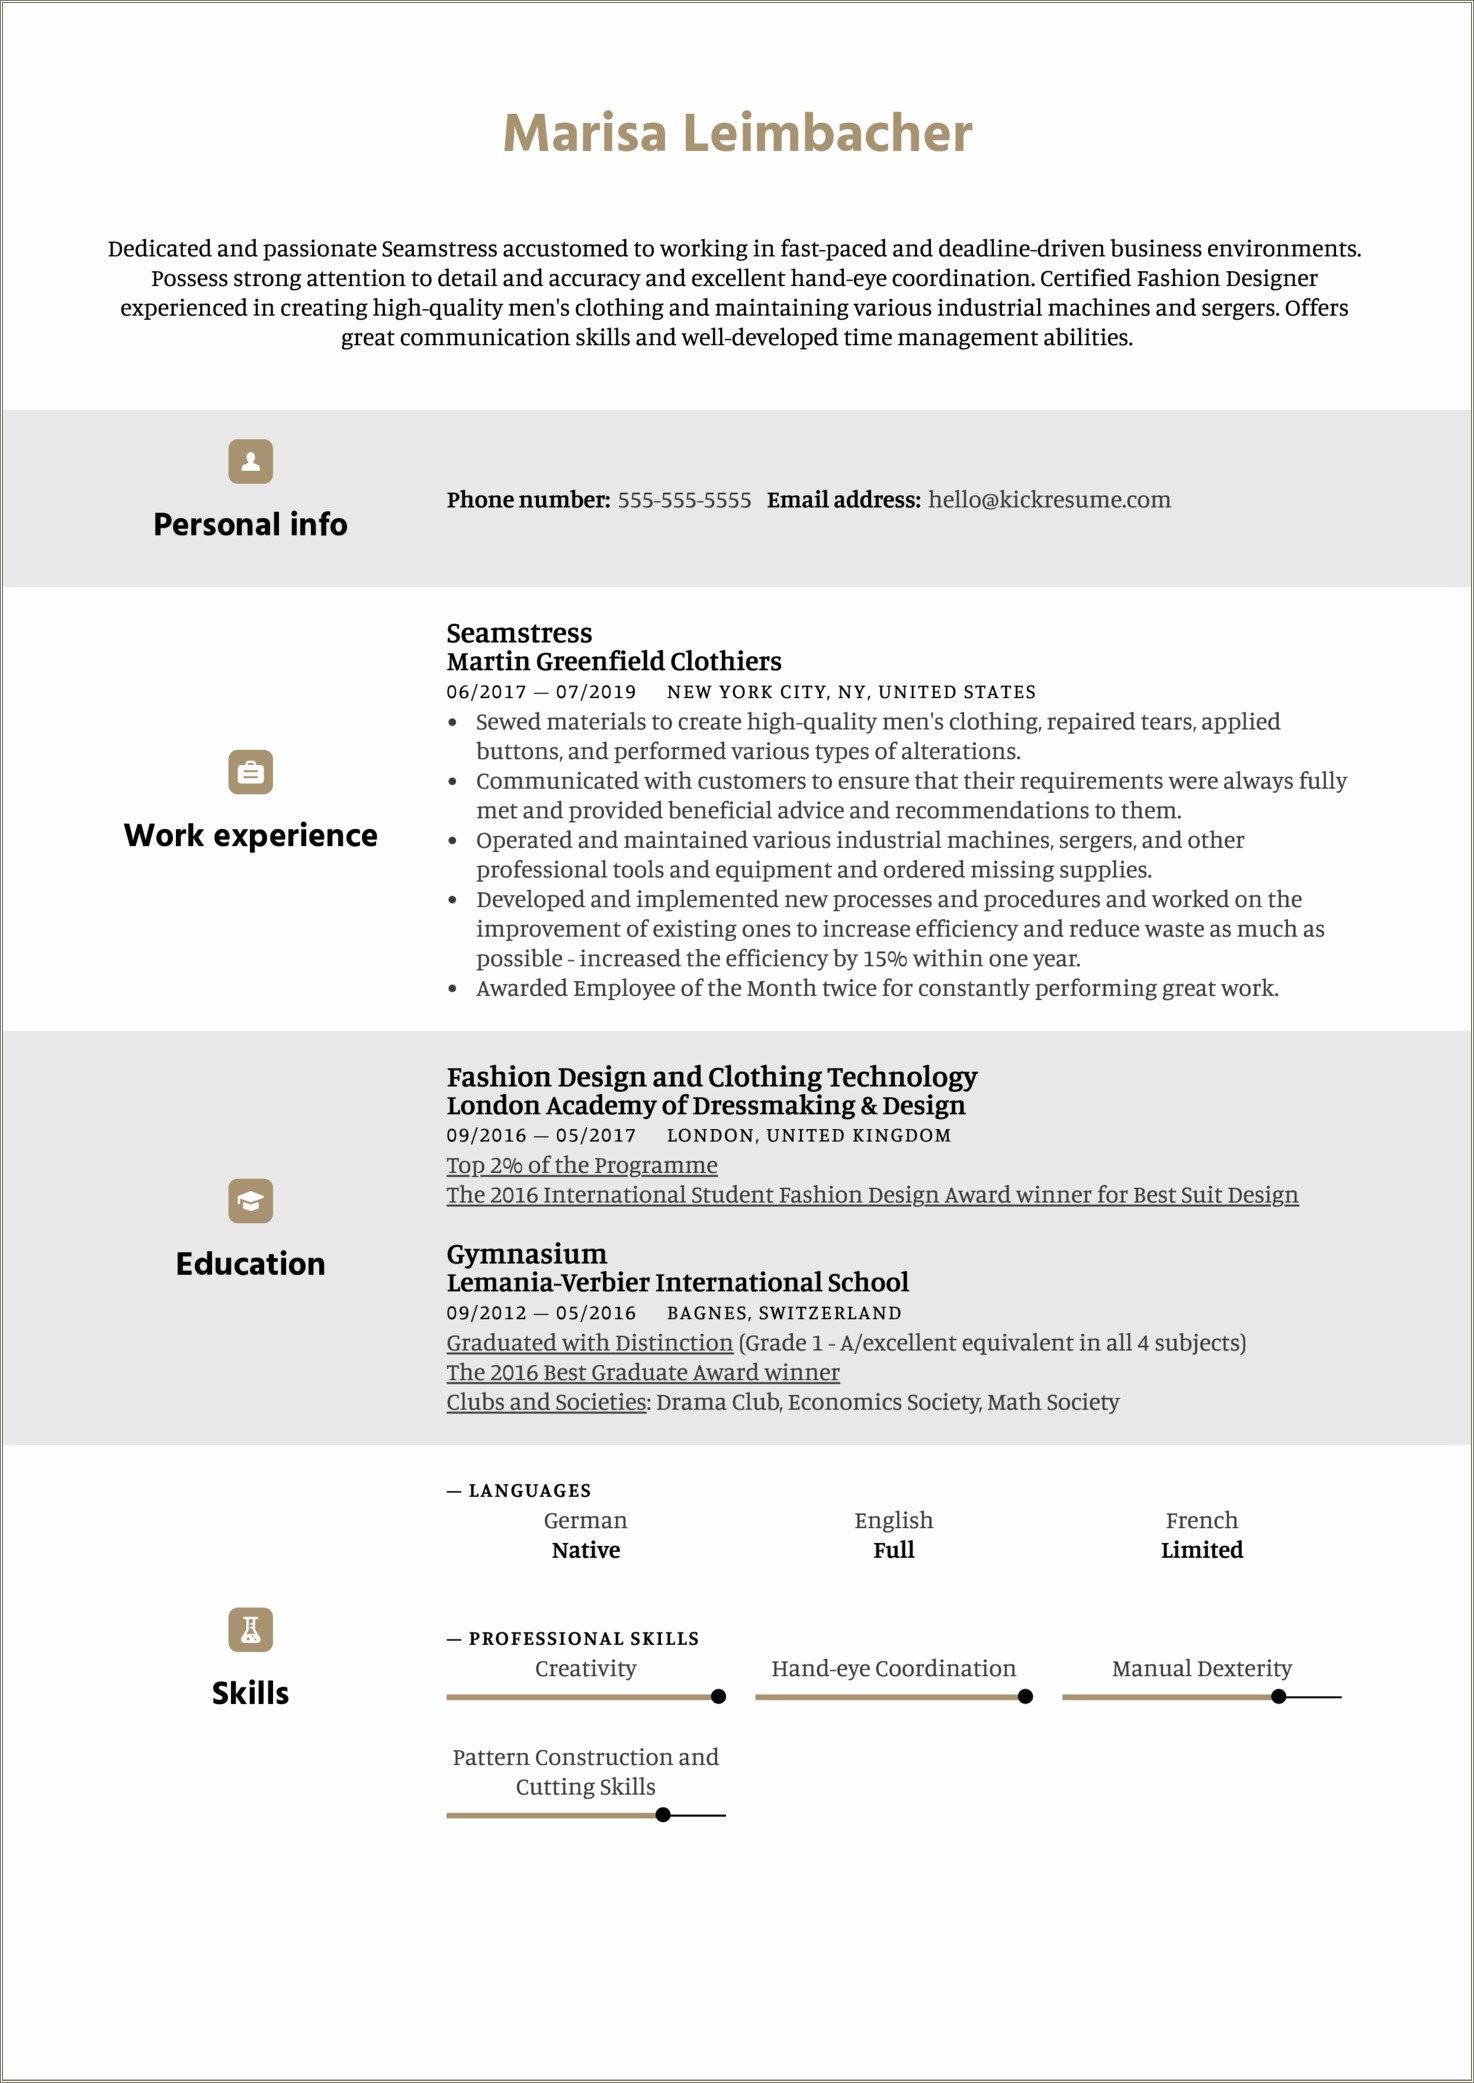 Example Of Professional Skills In Resume